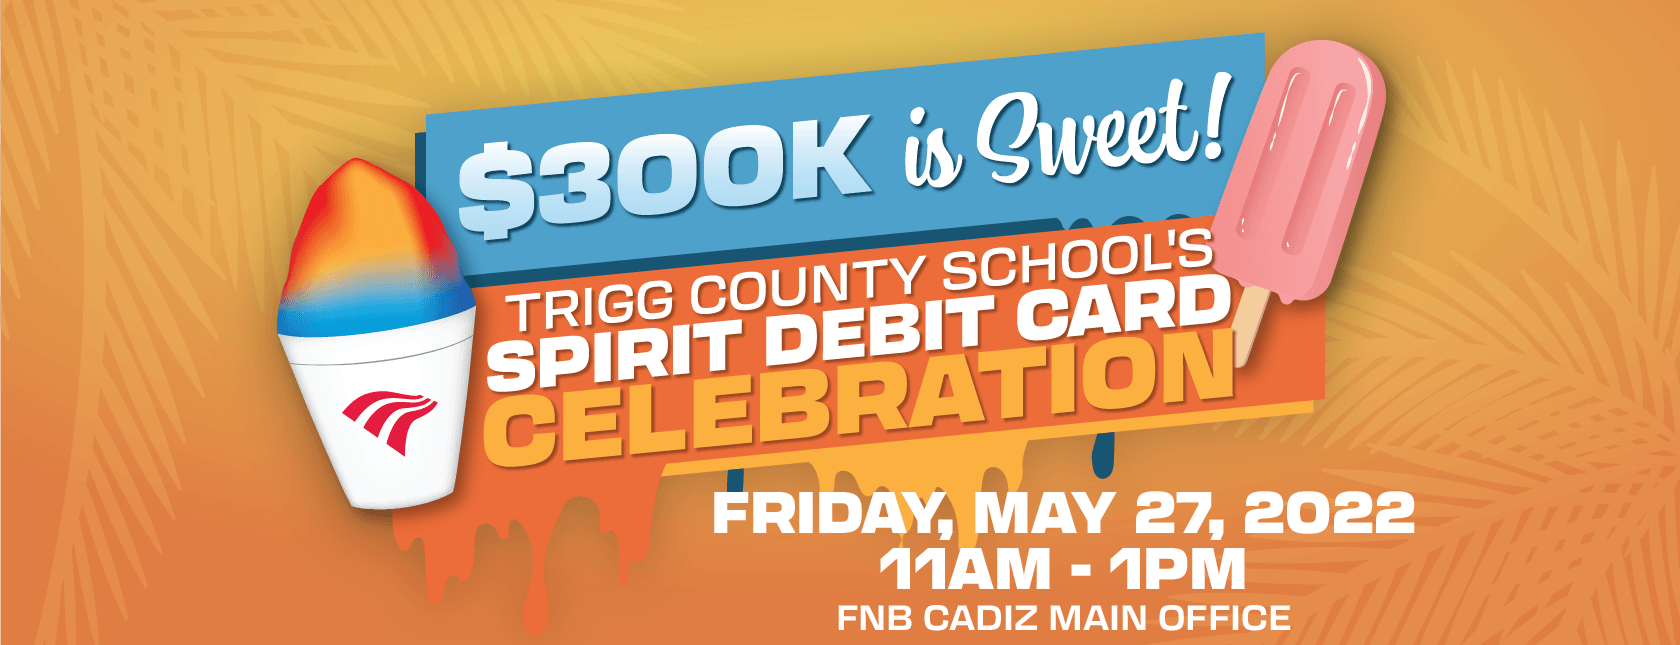 Trigg County Spirit Debit Celebration on May 27th from 11 AM to 1 PM